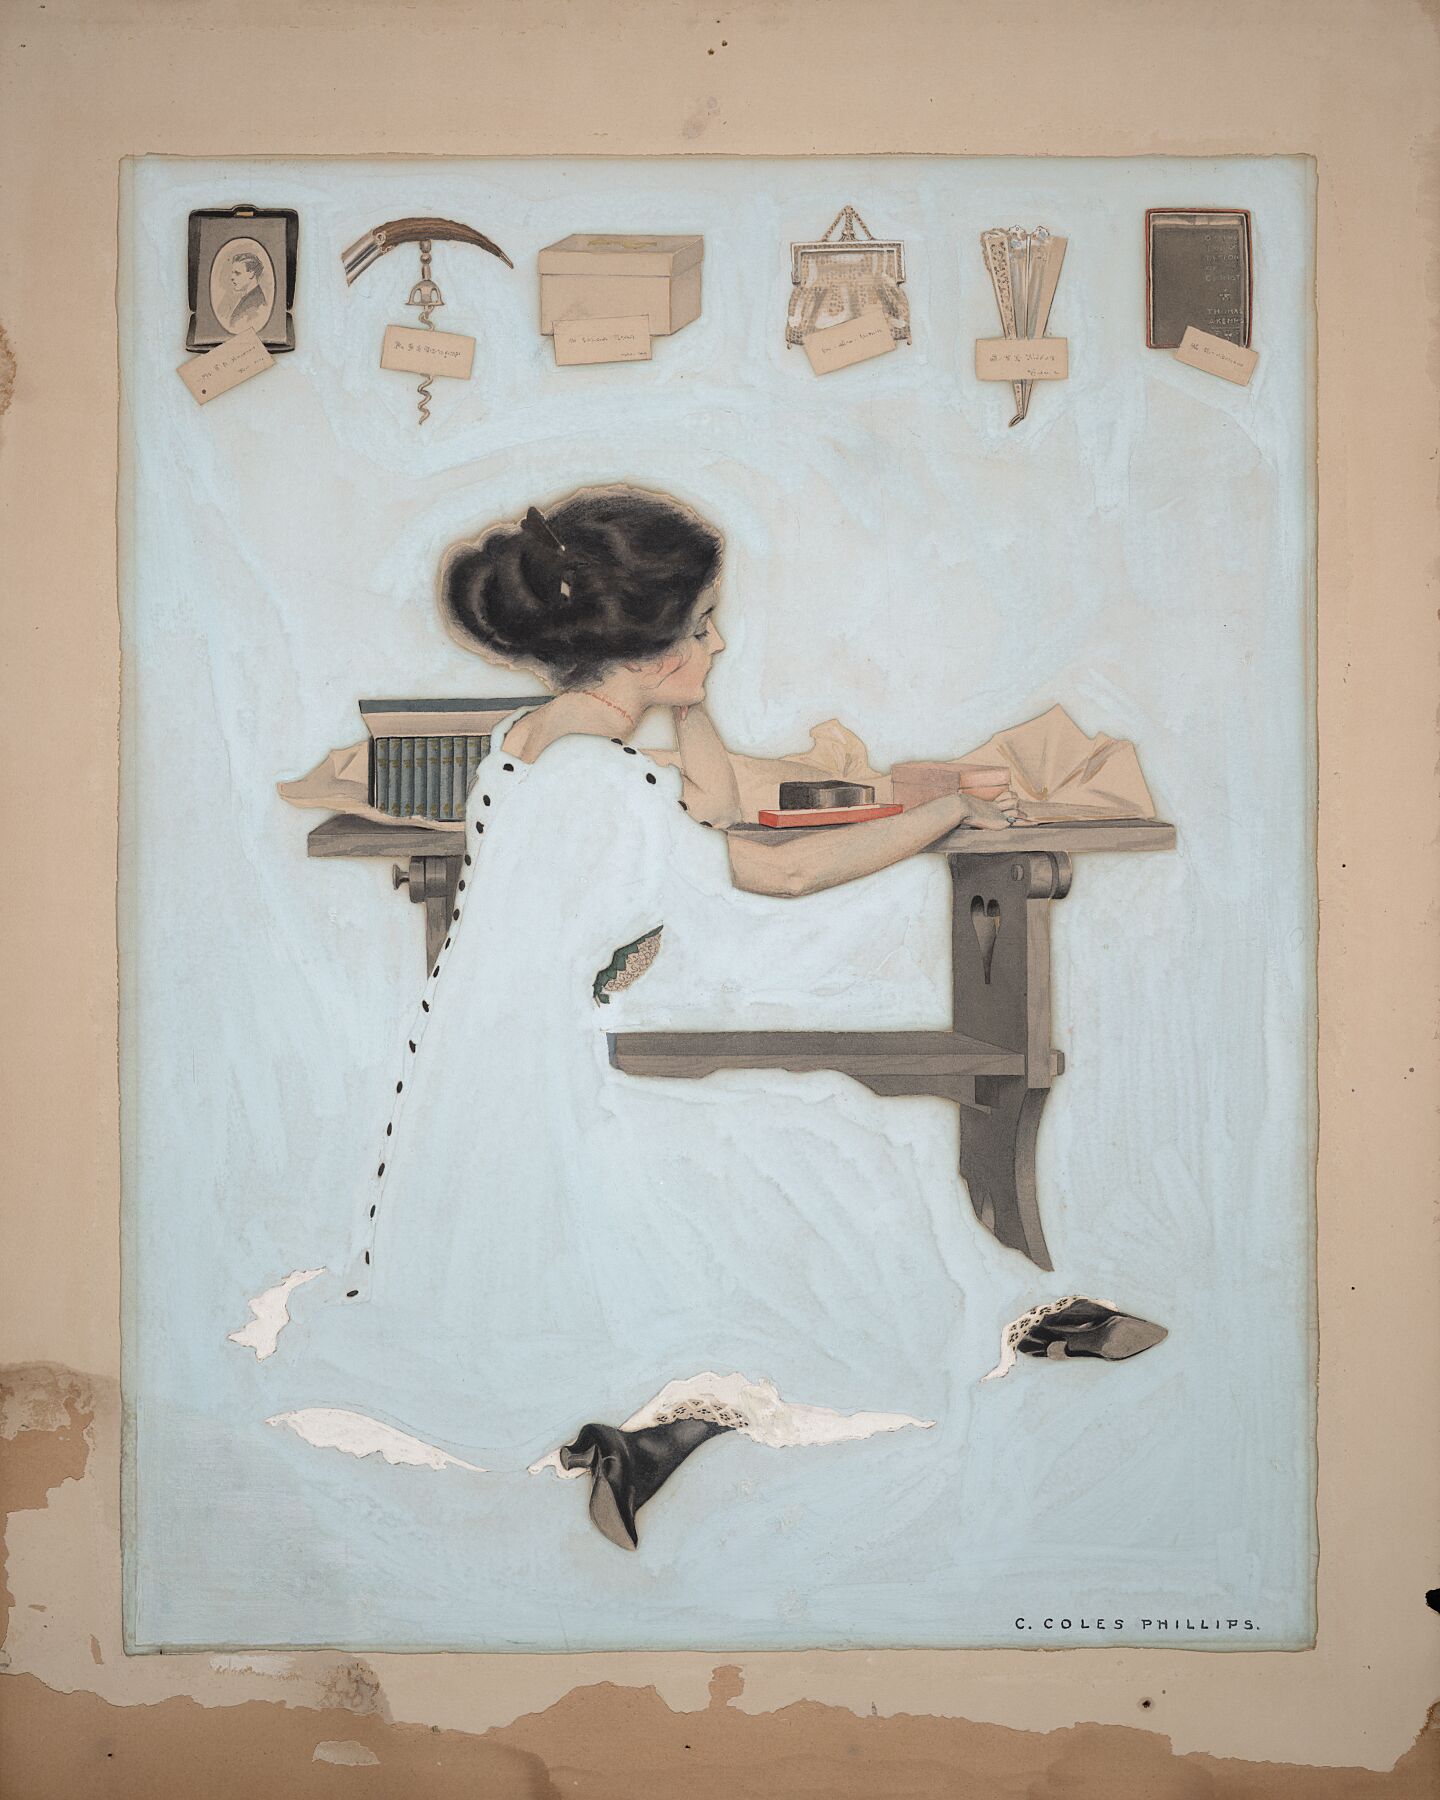 Know all Men by these Presents by C. Coles Phillips - c.1910 (without black border)